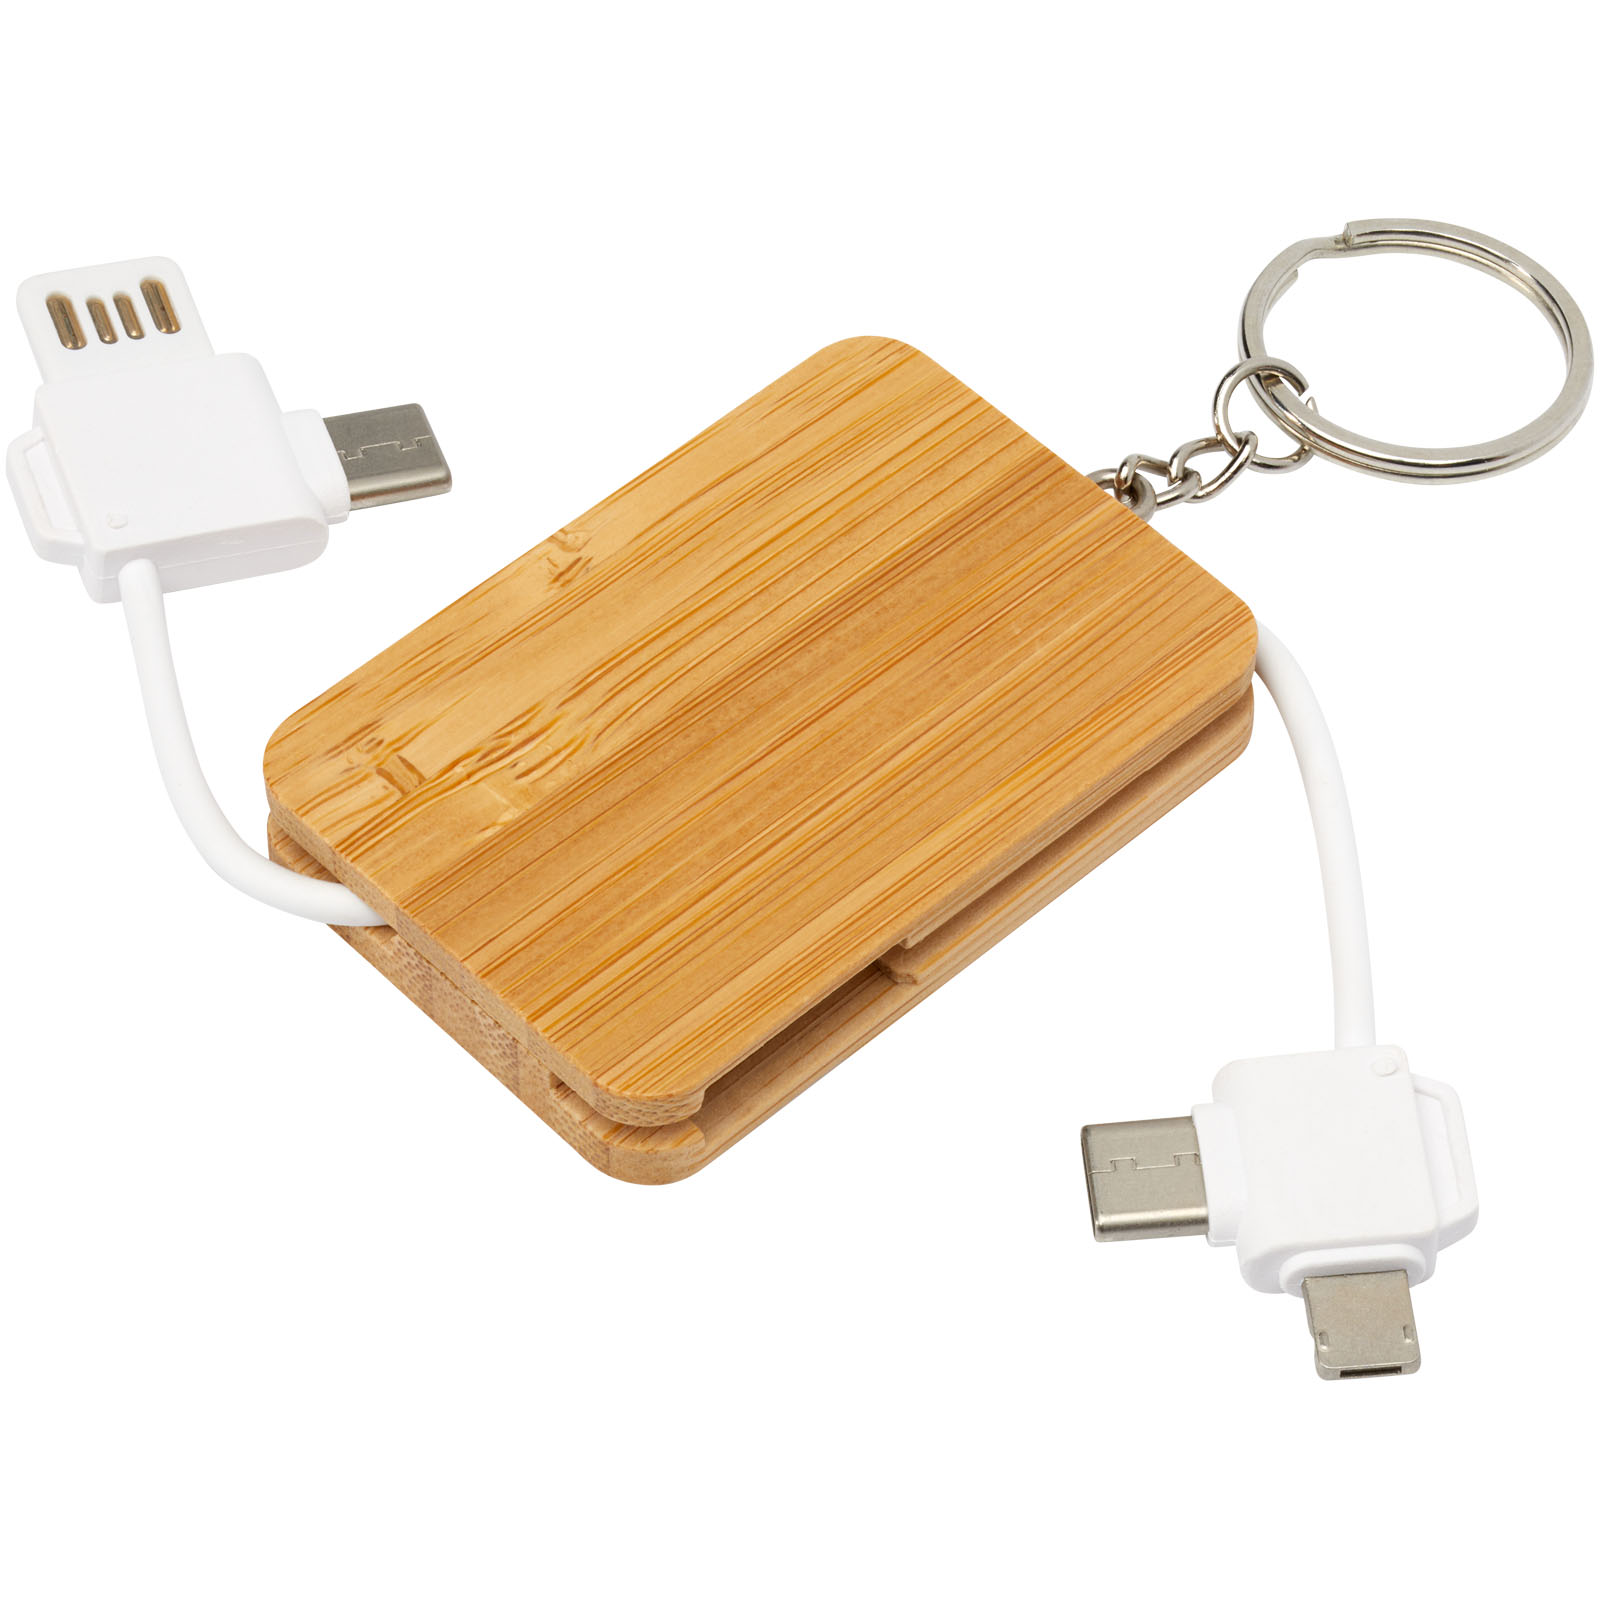 Advertising Cables - Reel 6-in-1 retractable bamboo key ring charging cable - 0